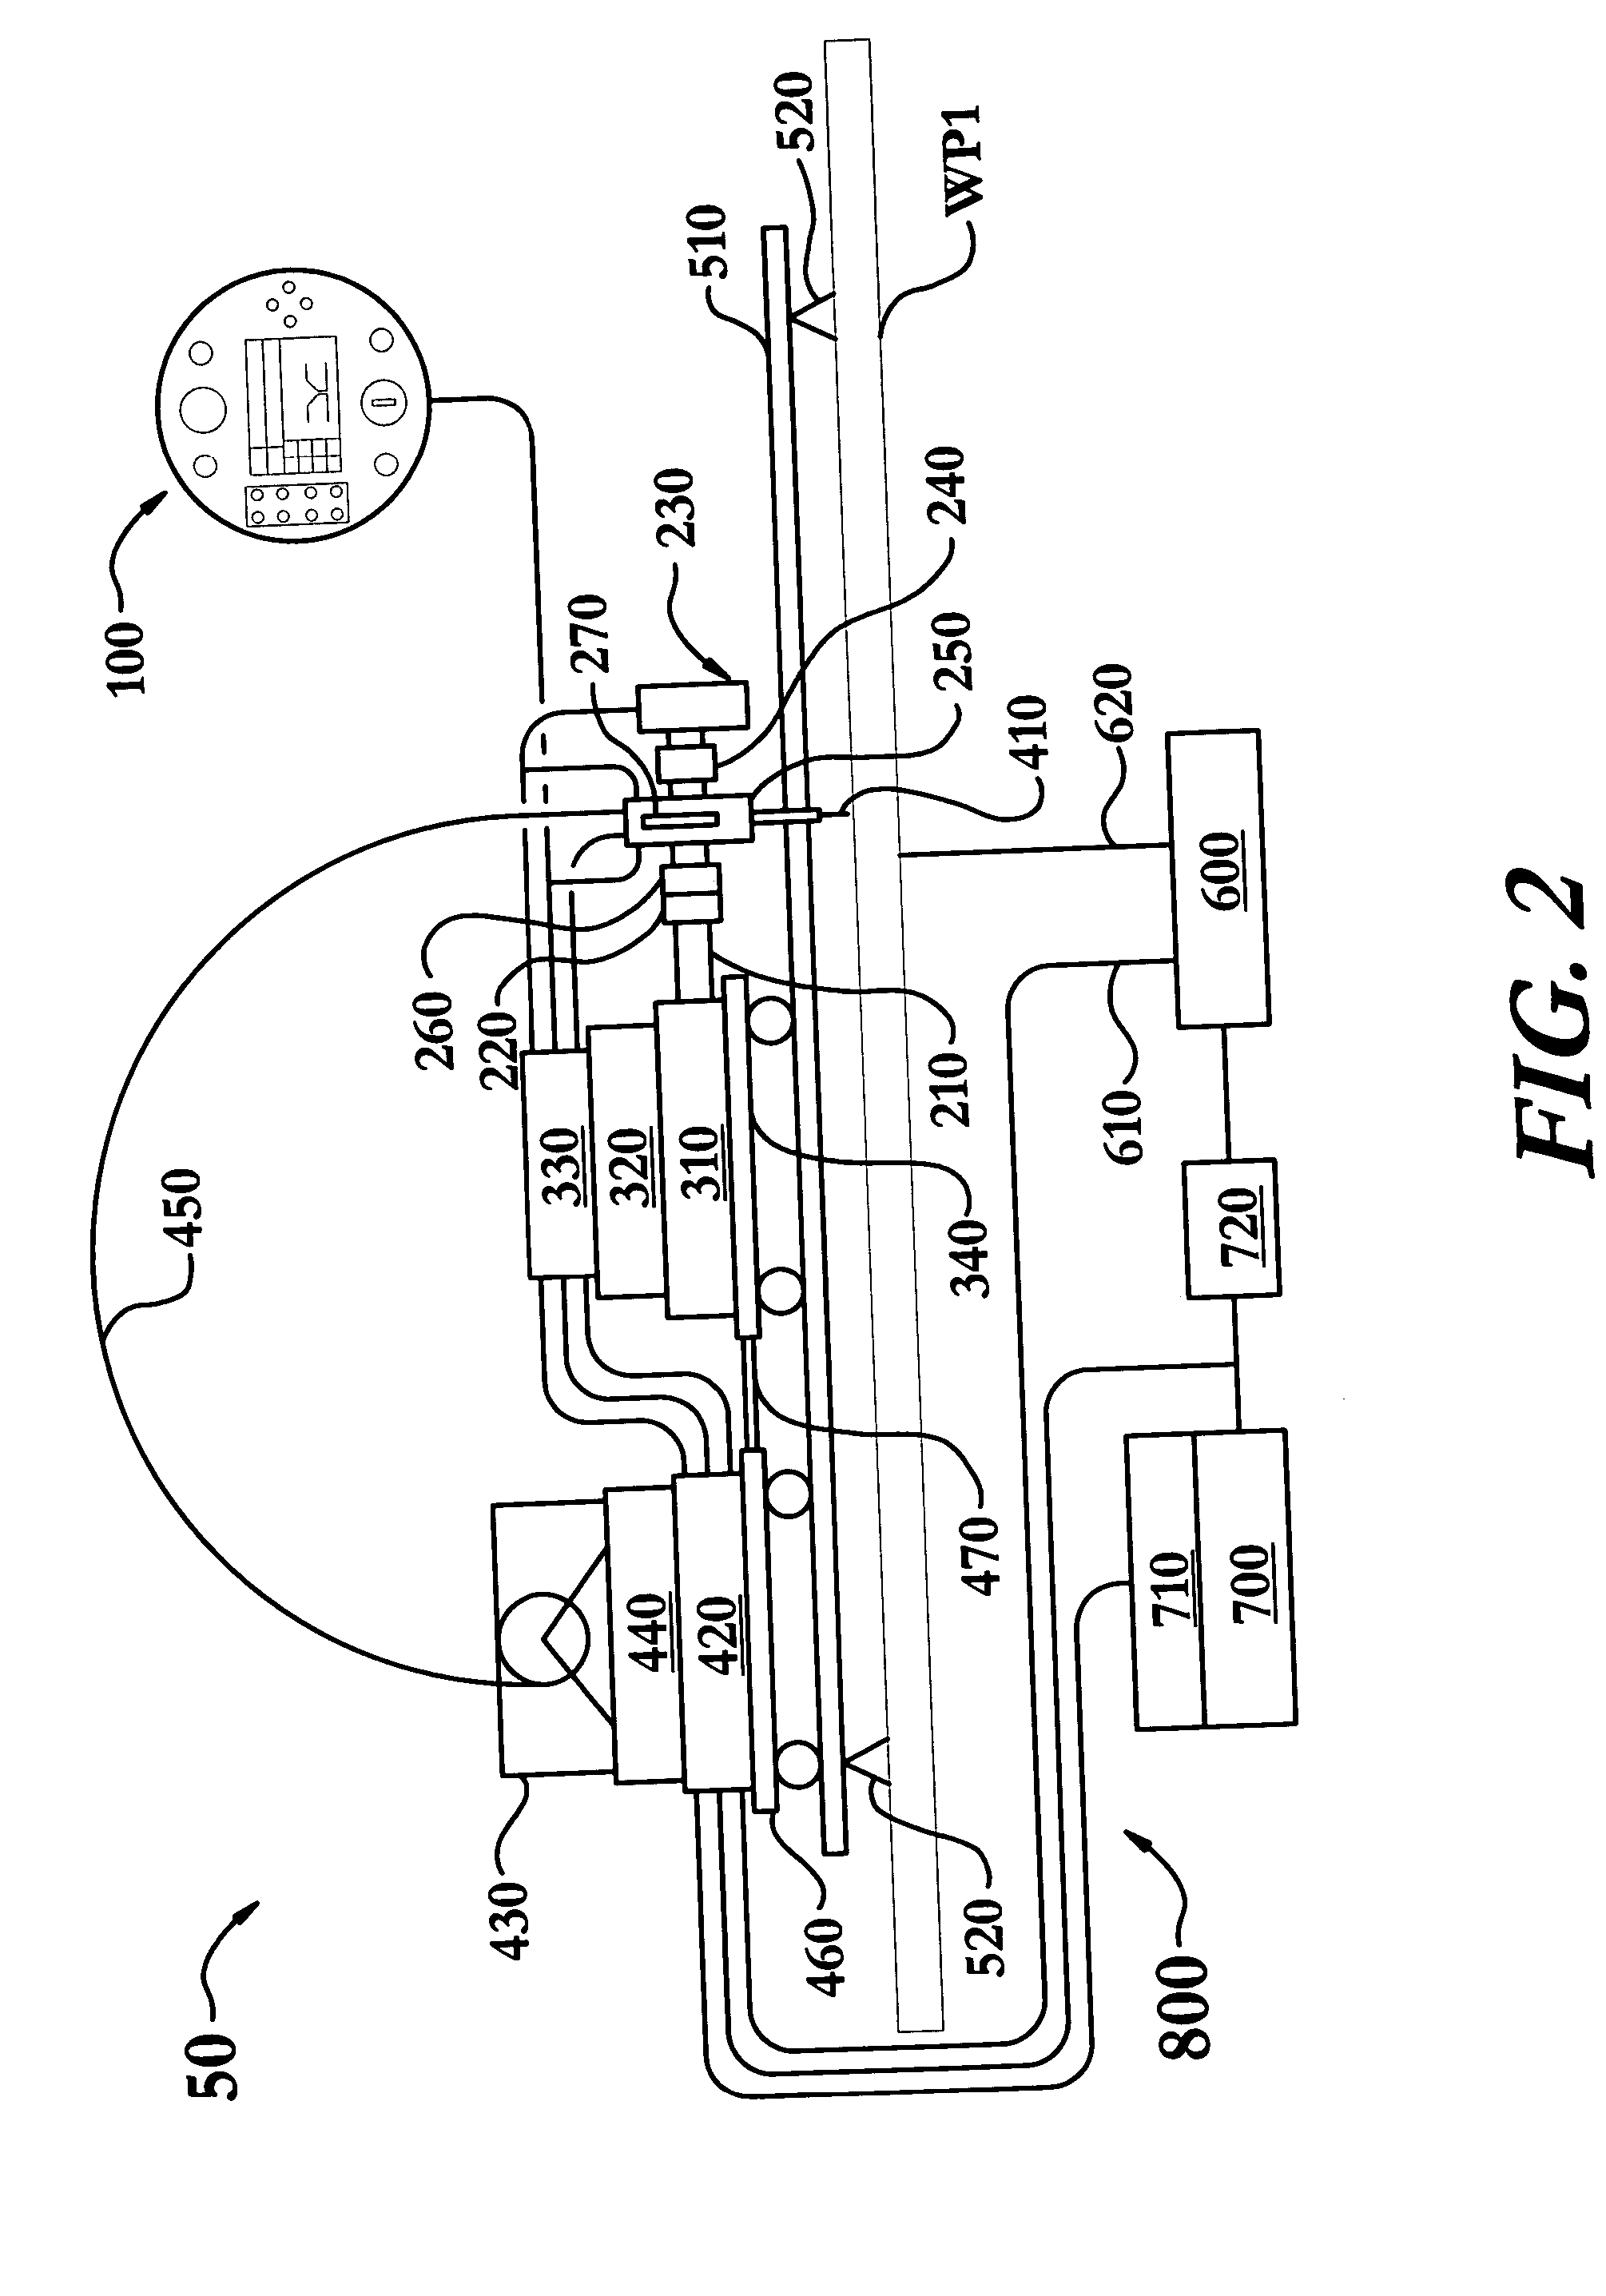 Adaptive and synergic fill welding method and apparatus